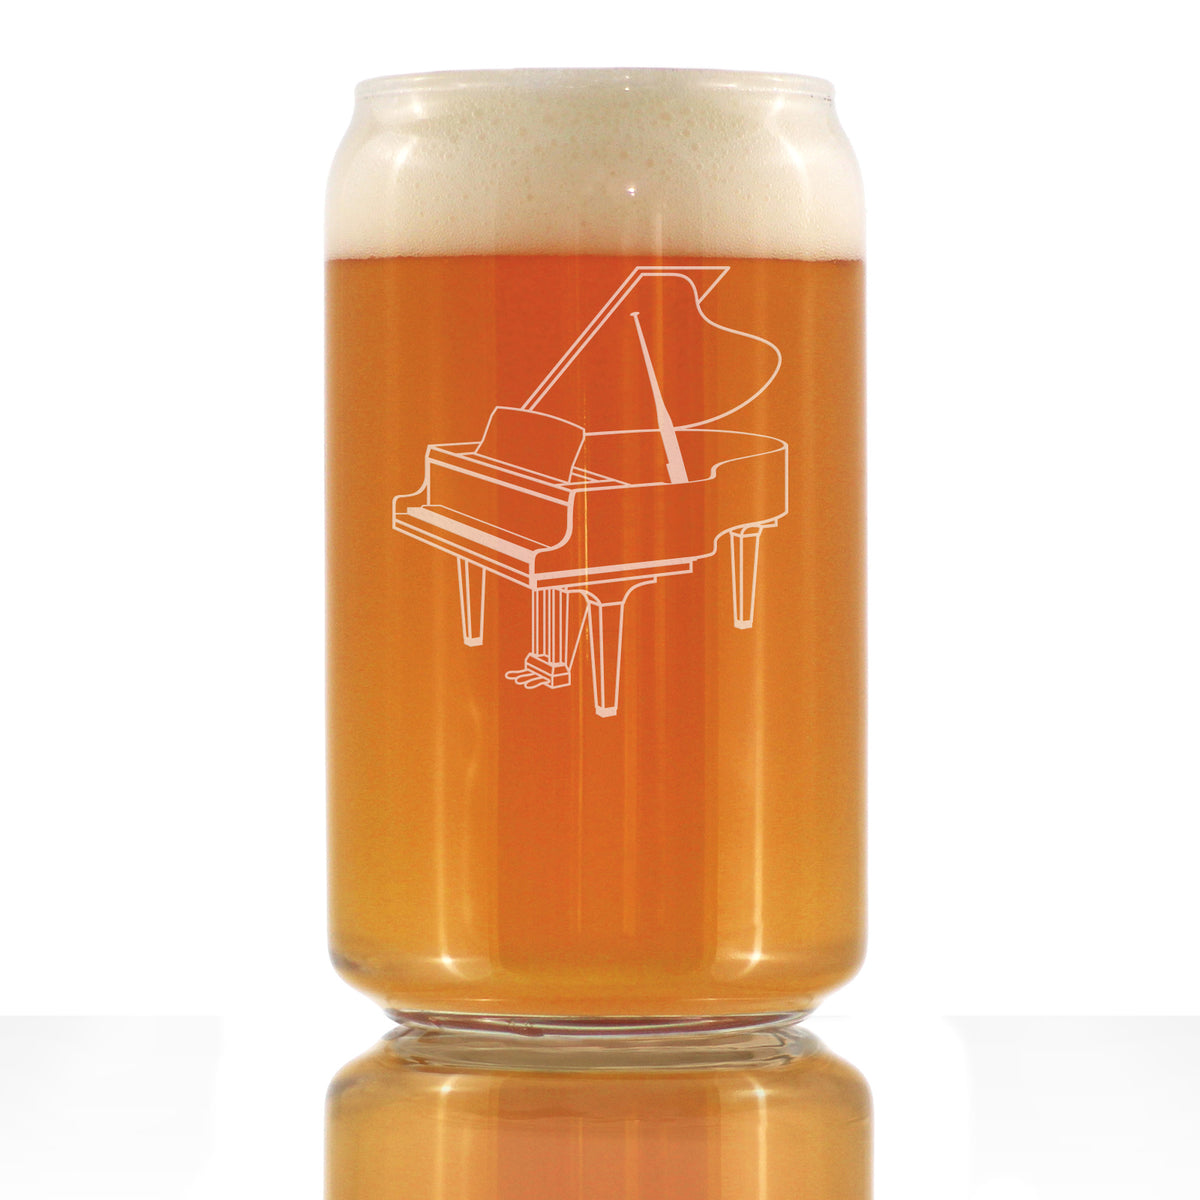 Grand Piano Beer Can Pint Glass - Music Gifts for Piano Players, Teachers and Musical Accessories for Musicians that Play Keys - 16 Oz Glasses